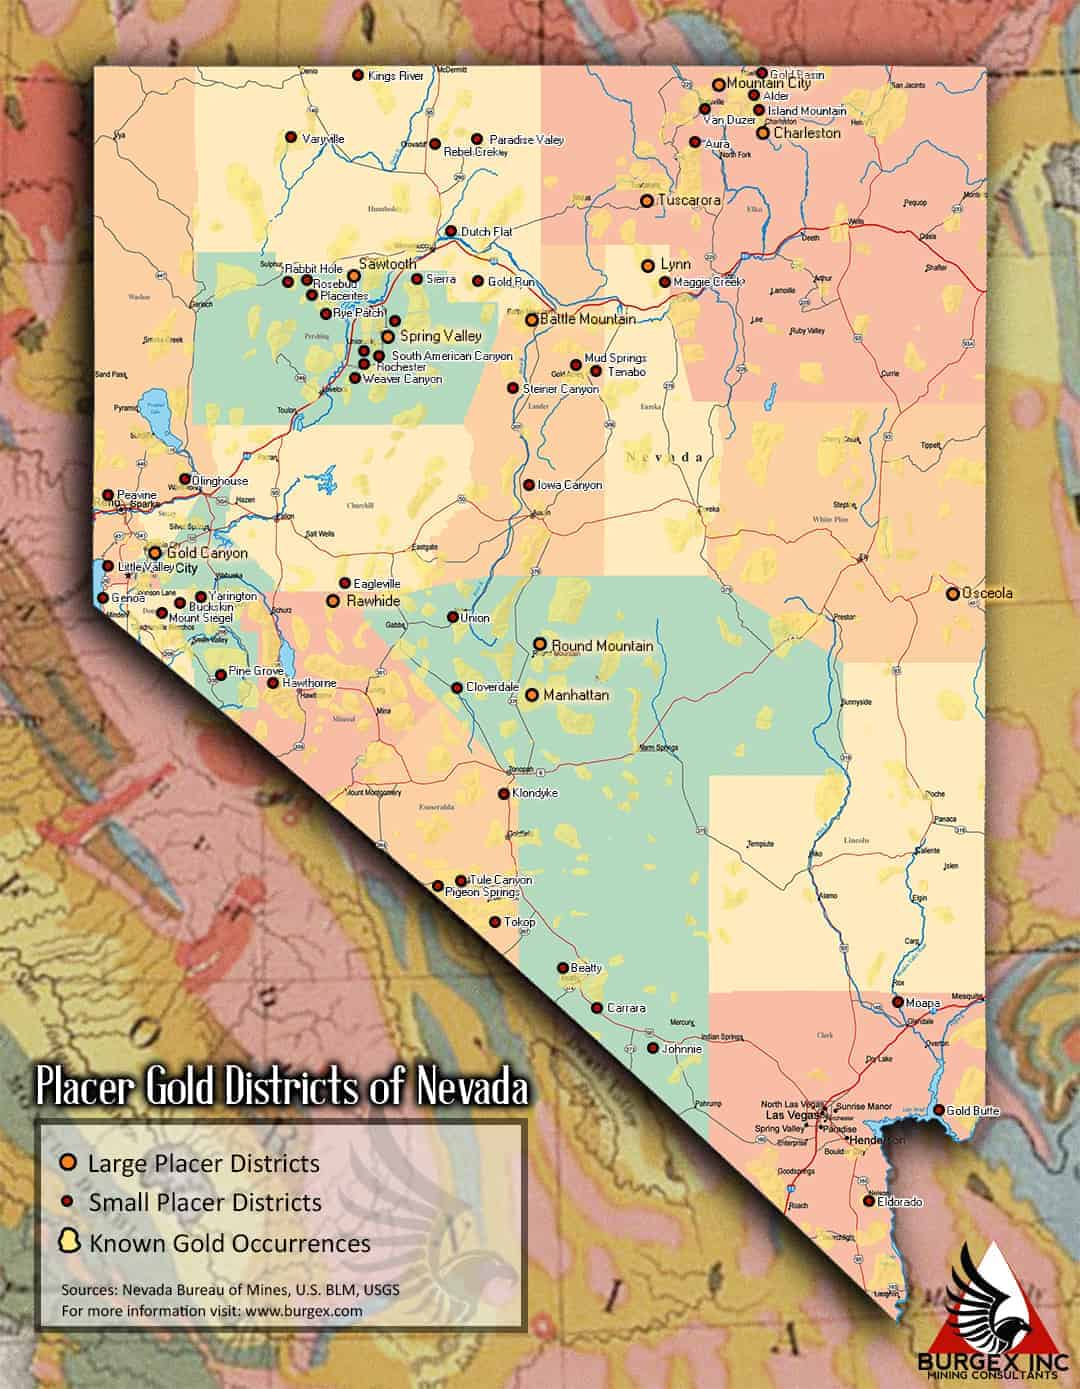 Map of Placer Gold Districts of Nevada